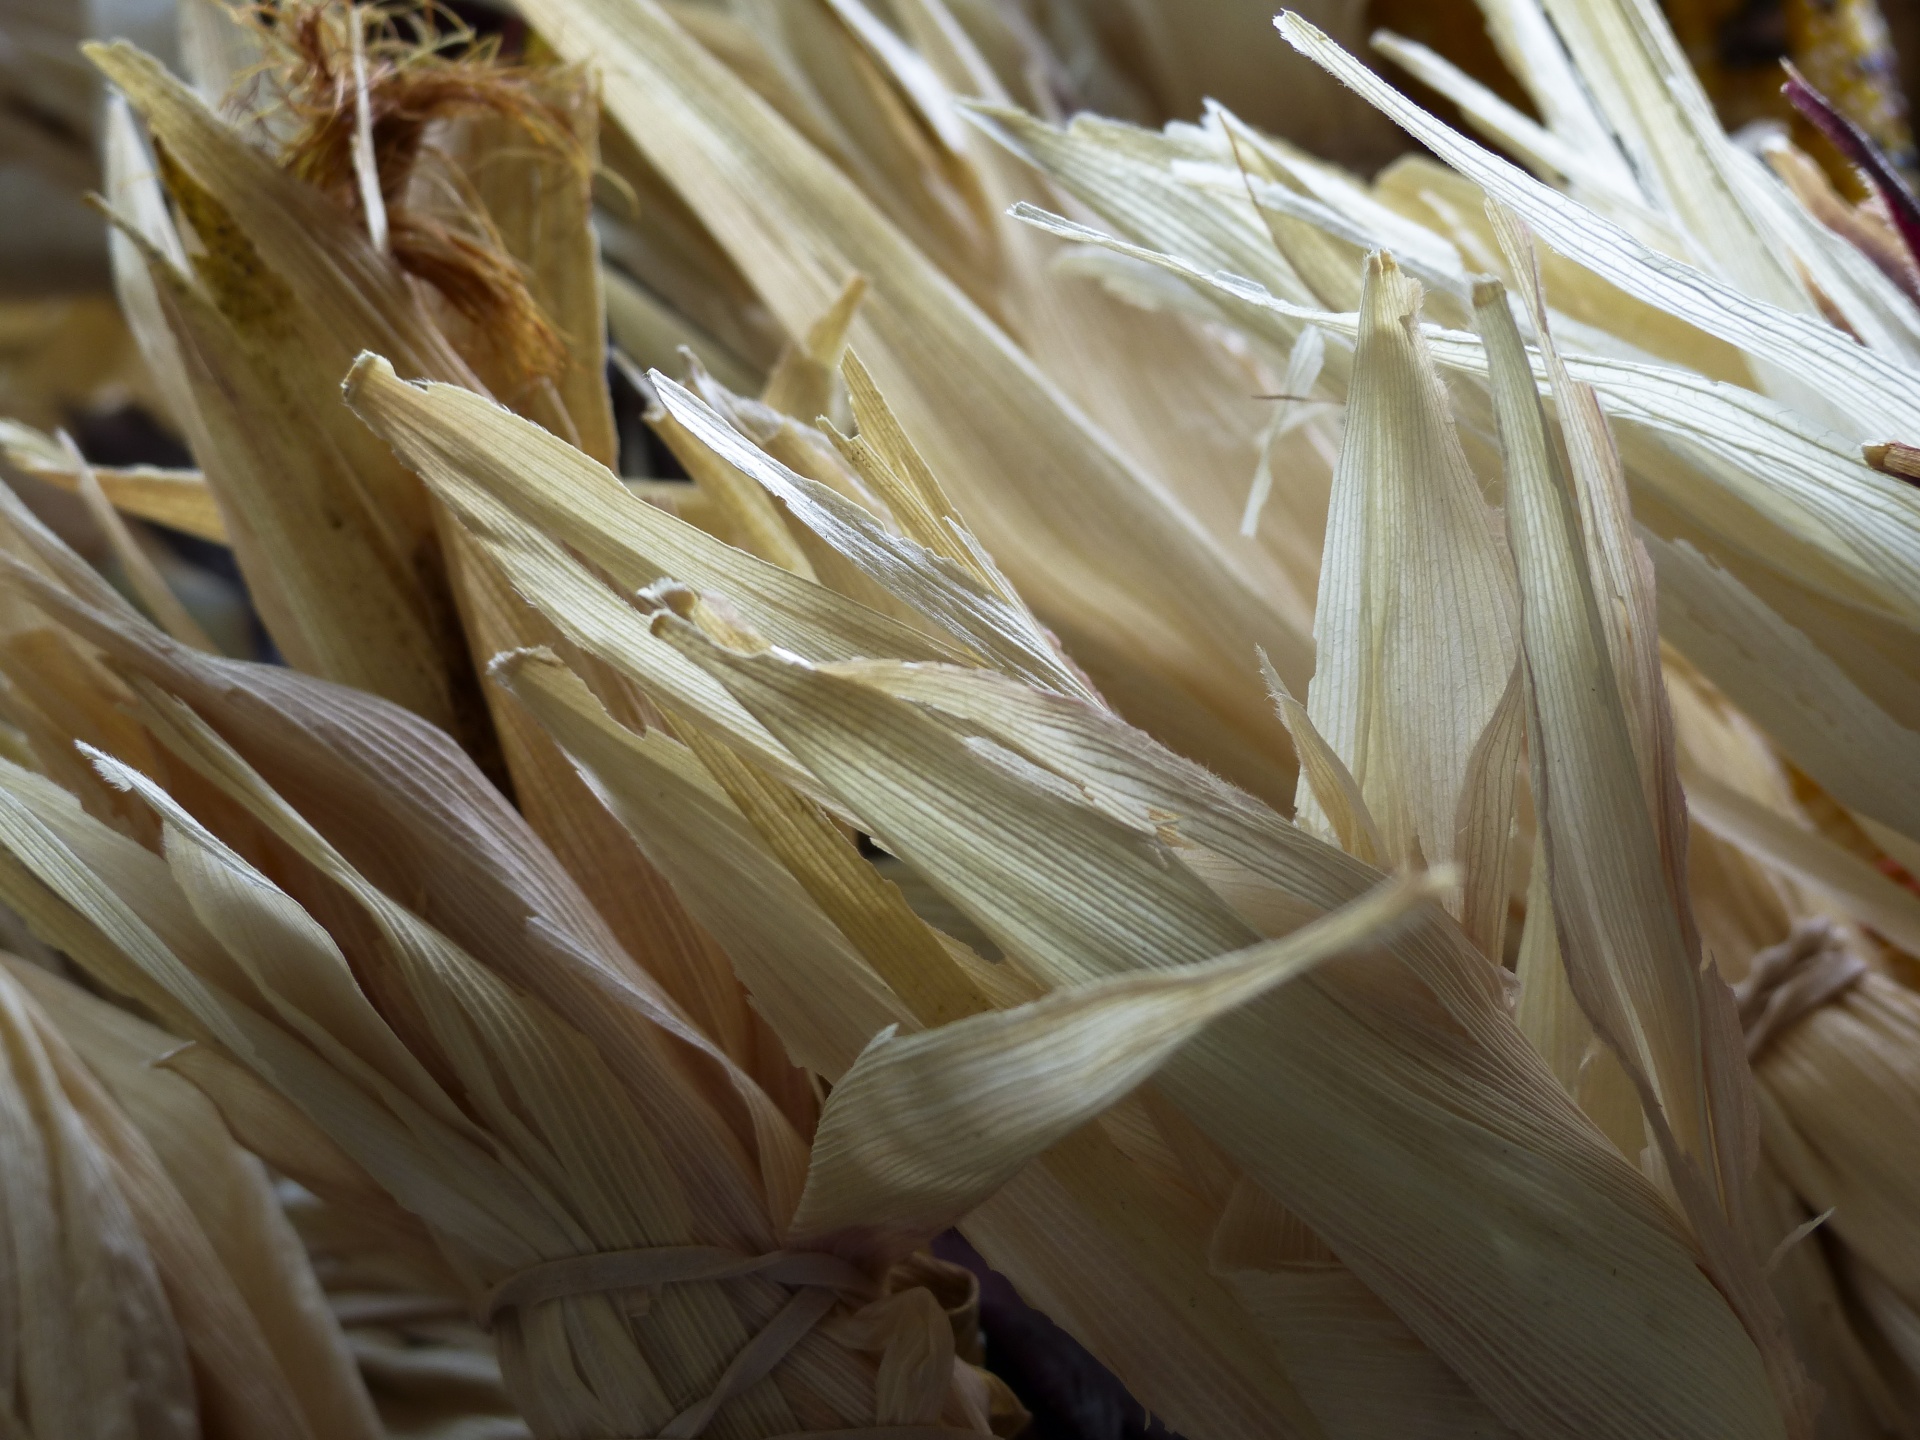 Fall corn husks from corn stalks, dried and ready for decoration